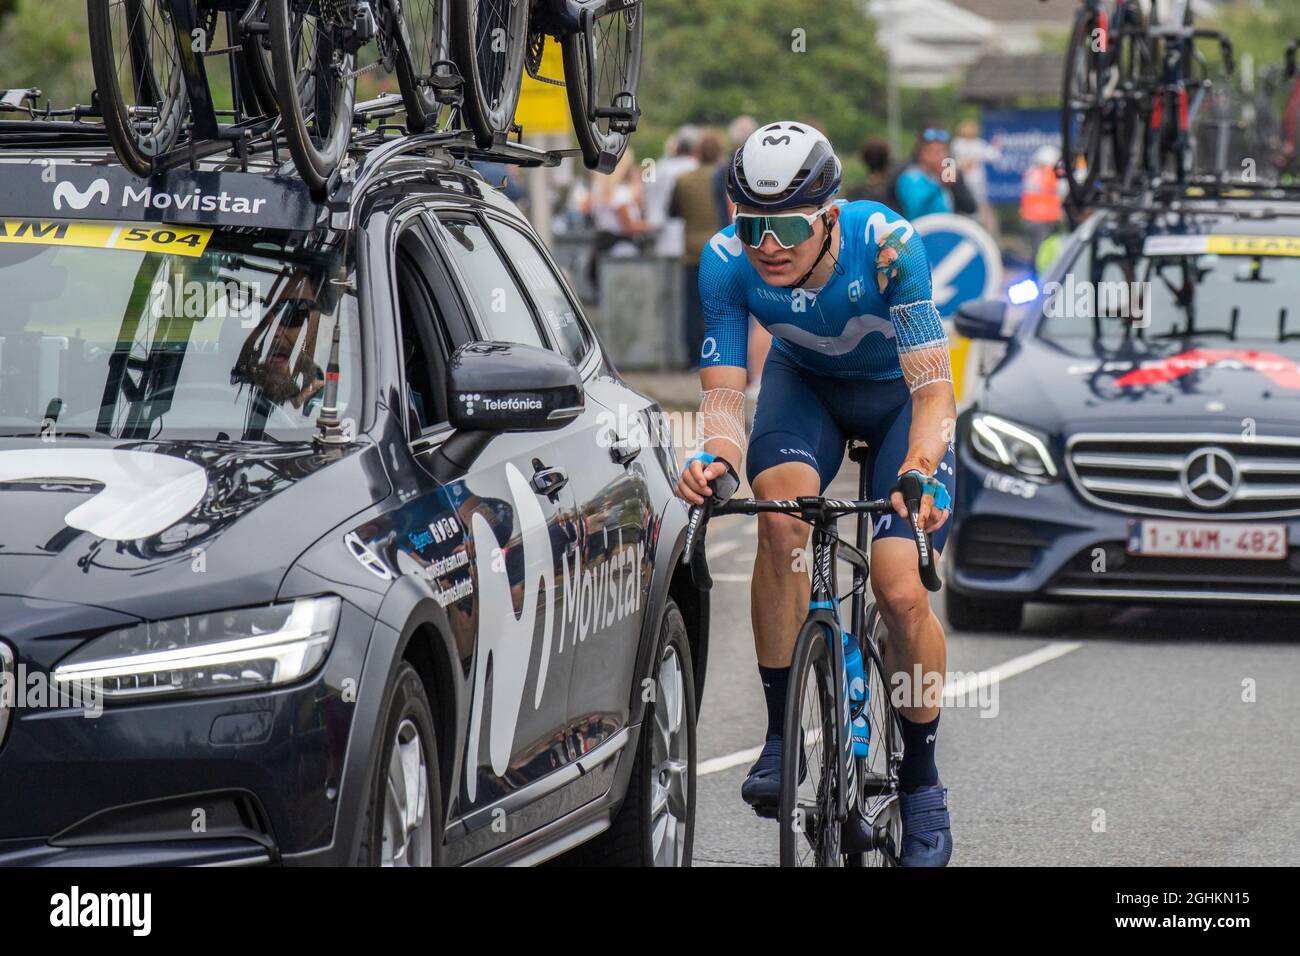 An injured rider from the Movistar Team Riding alongside a support vehicle car in the opening stage of the iconic Tour of Britain 2021 - known as The Stock Photo